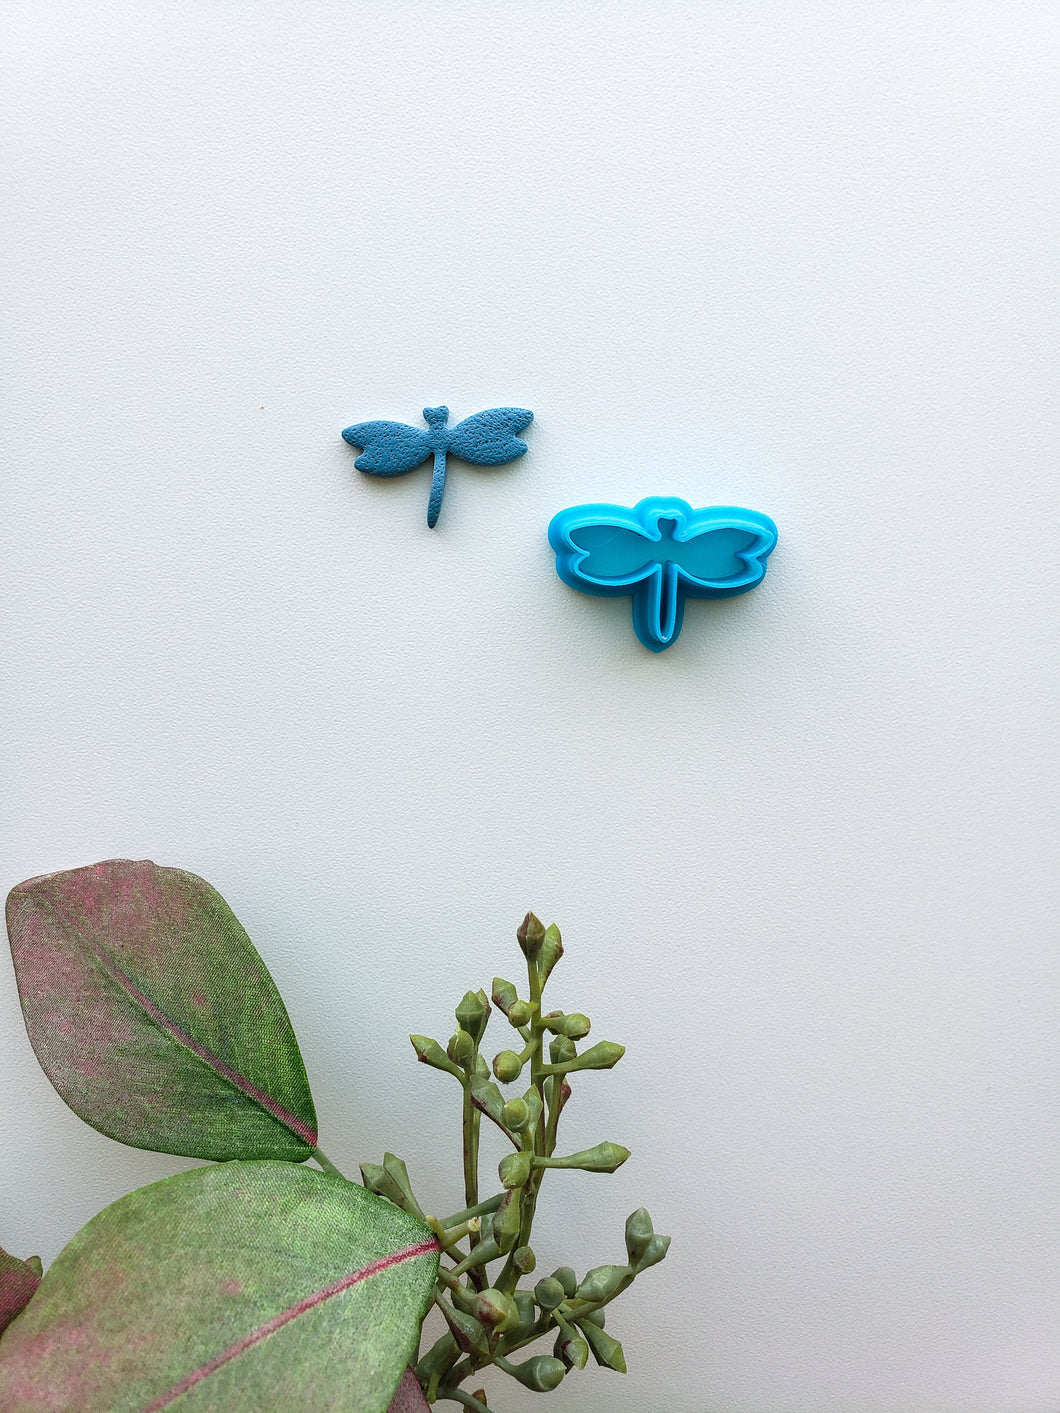 Dragonfly | Clay Cutter